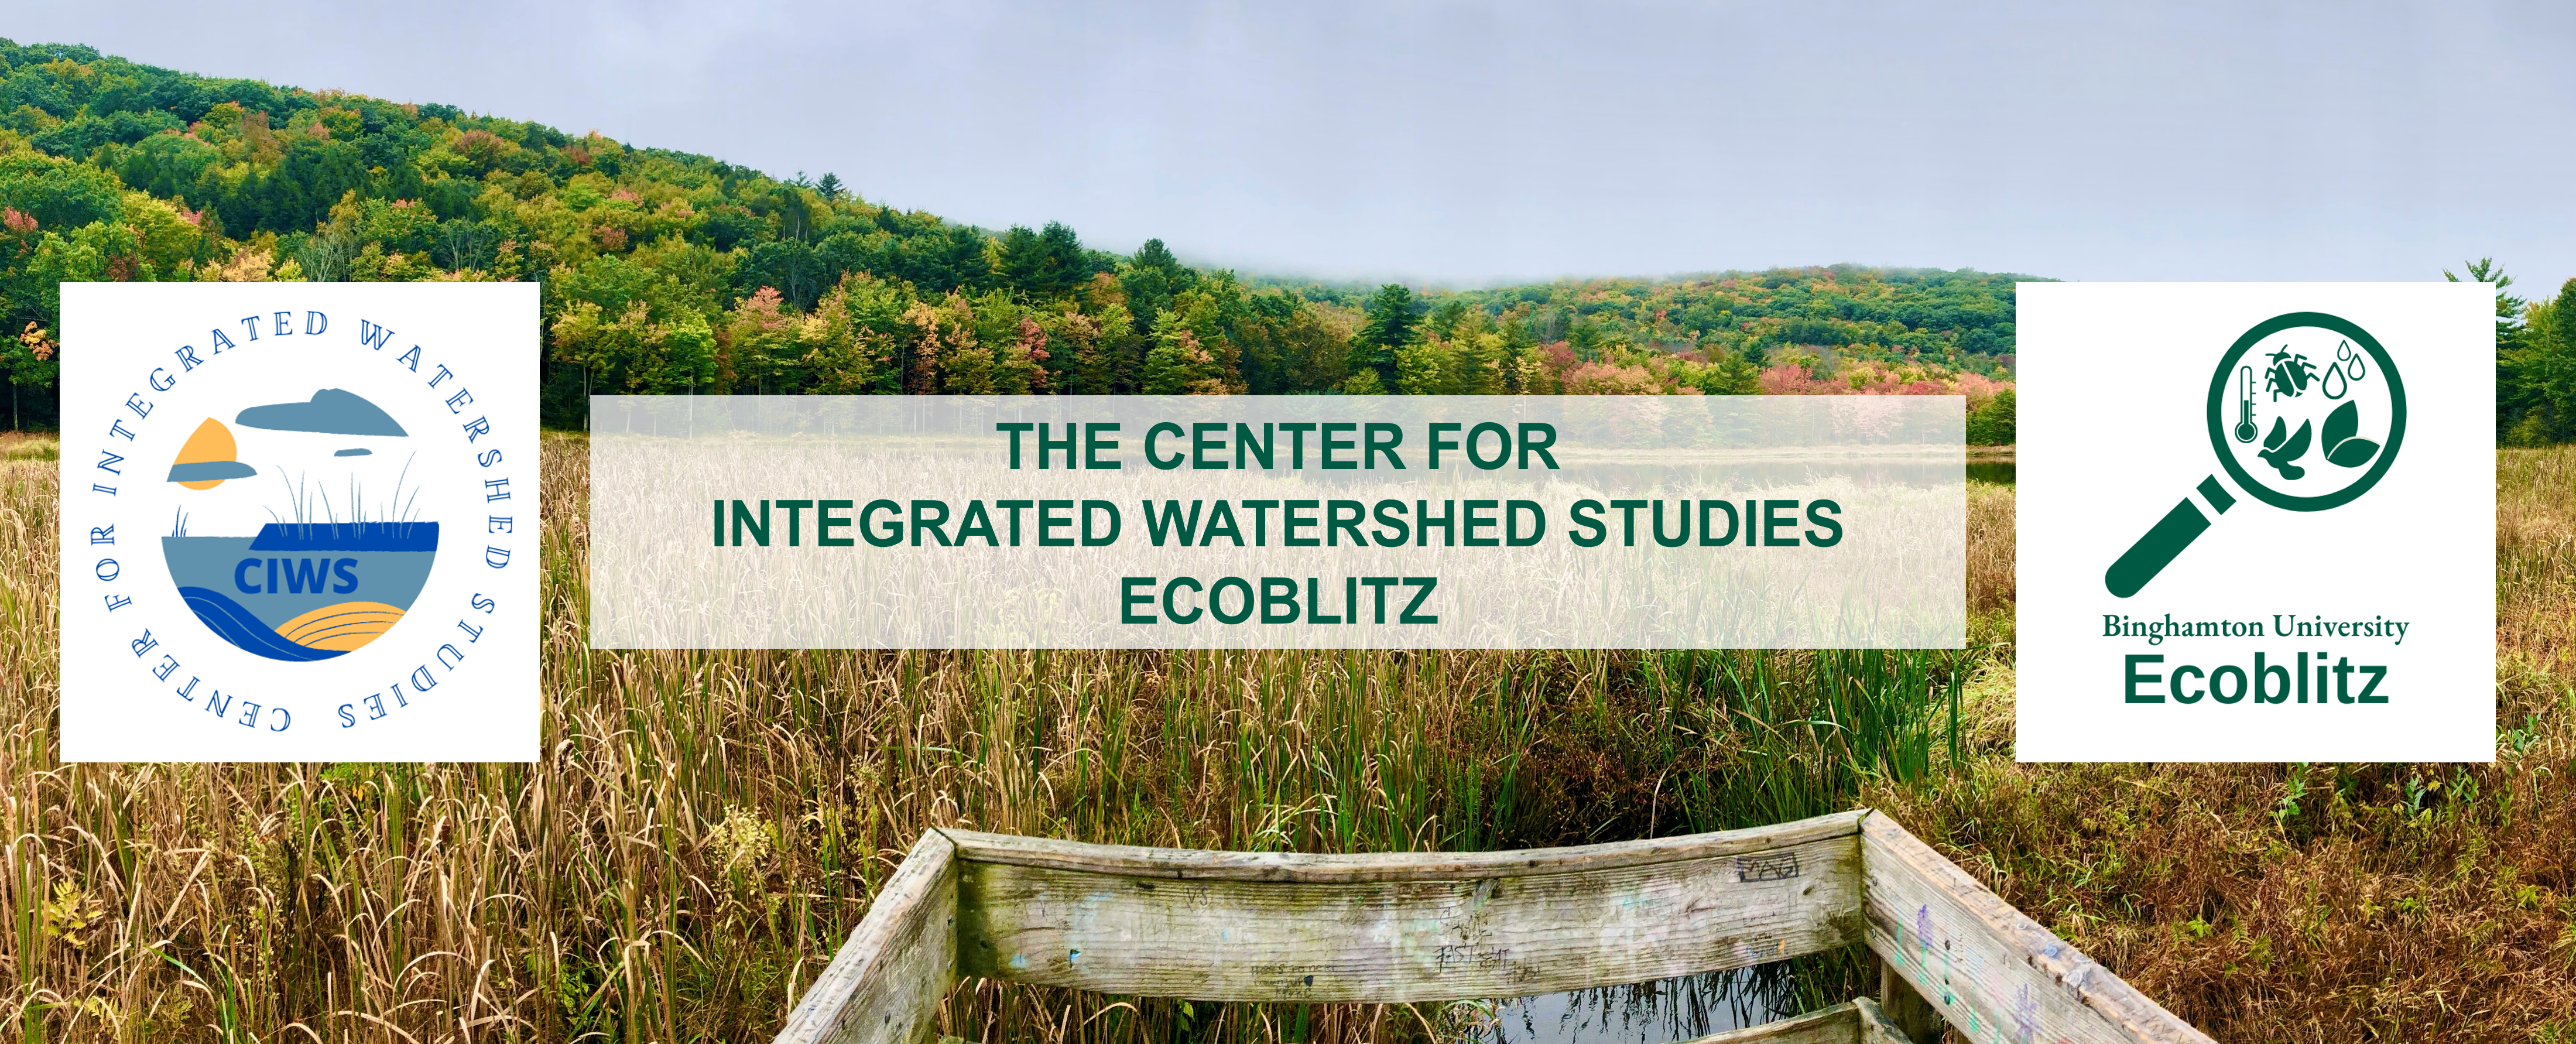 Binghamton Center for Integrated Watershed Studies